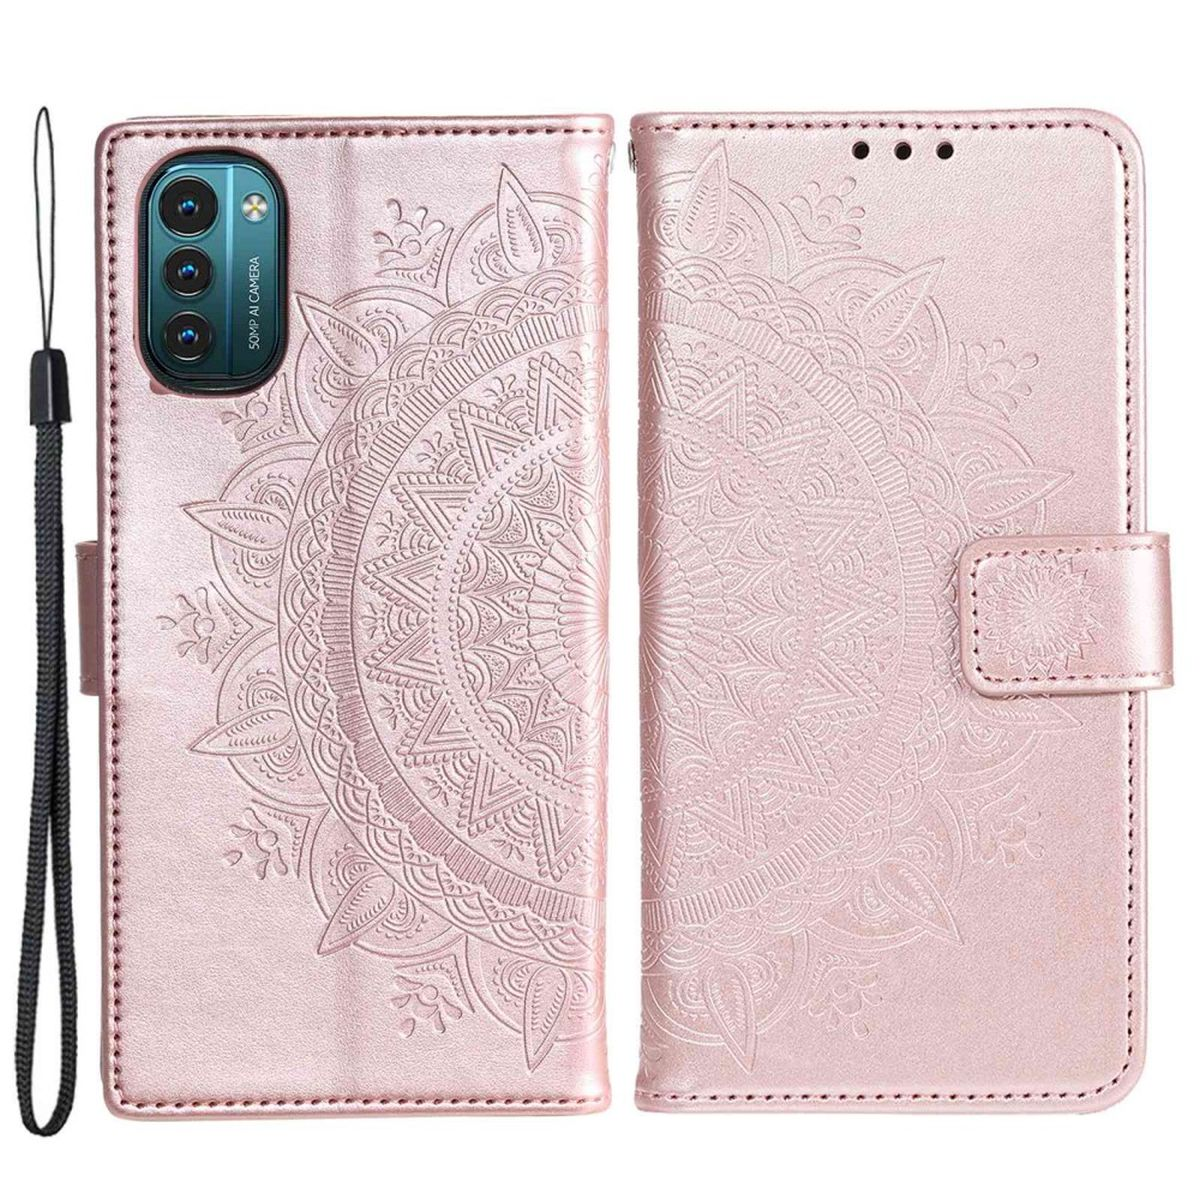 COVERKINGZ Klapphülle mit Mandala G11, / Rosegold Nokia, G21 Bookcover, Muster